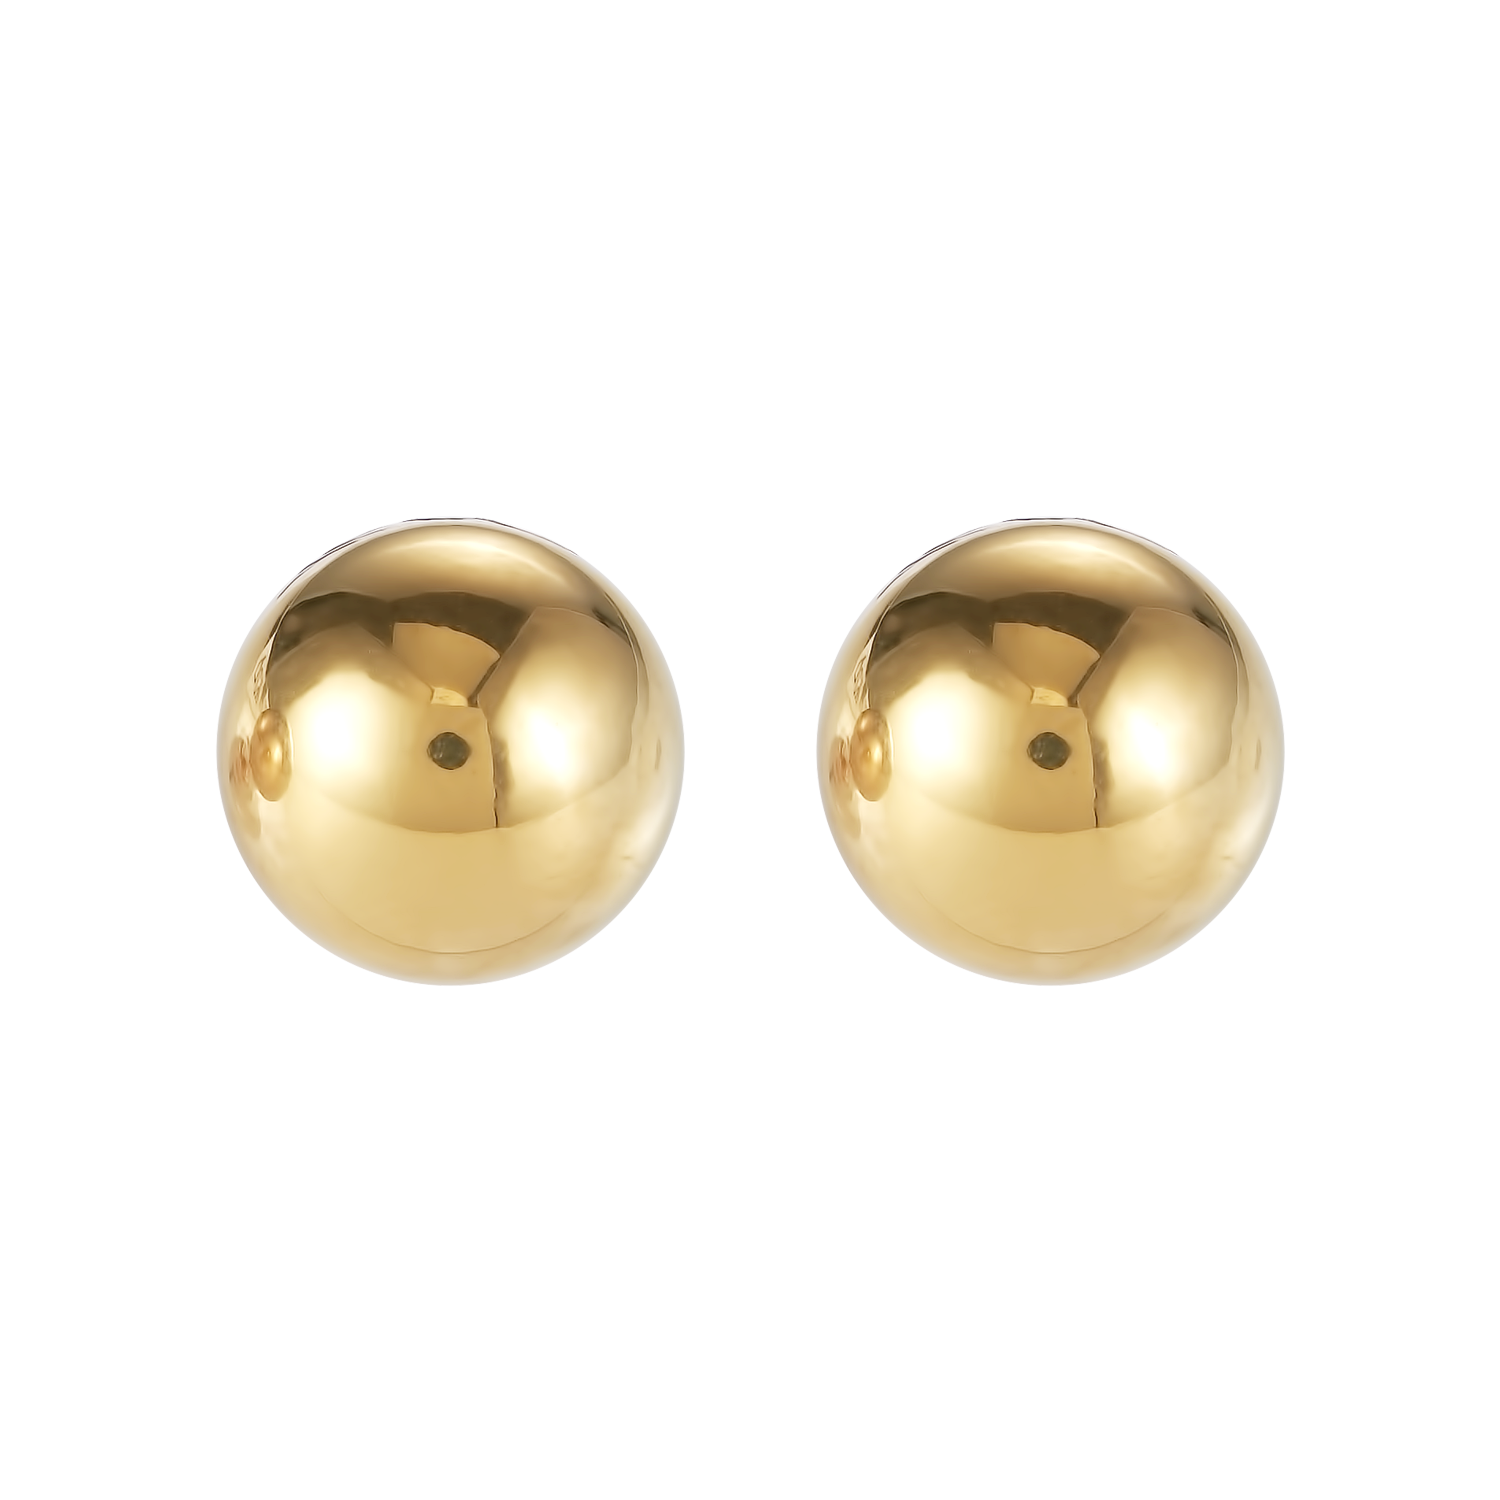 Earrings stainless steel ball large gold